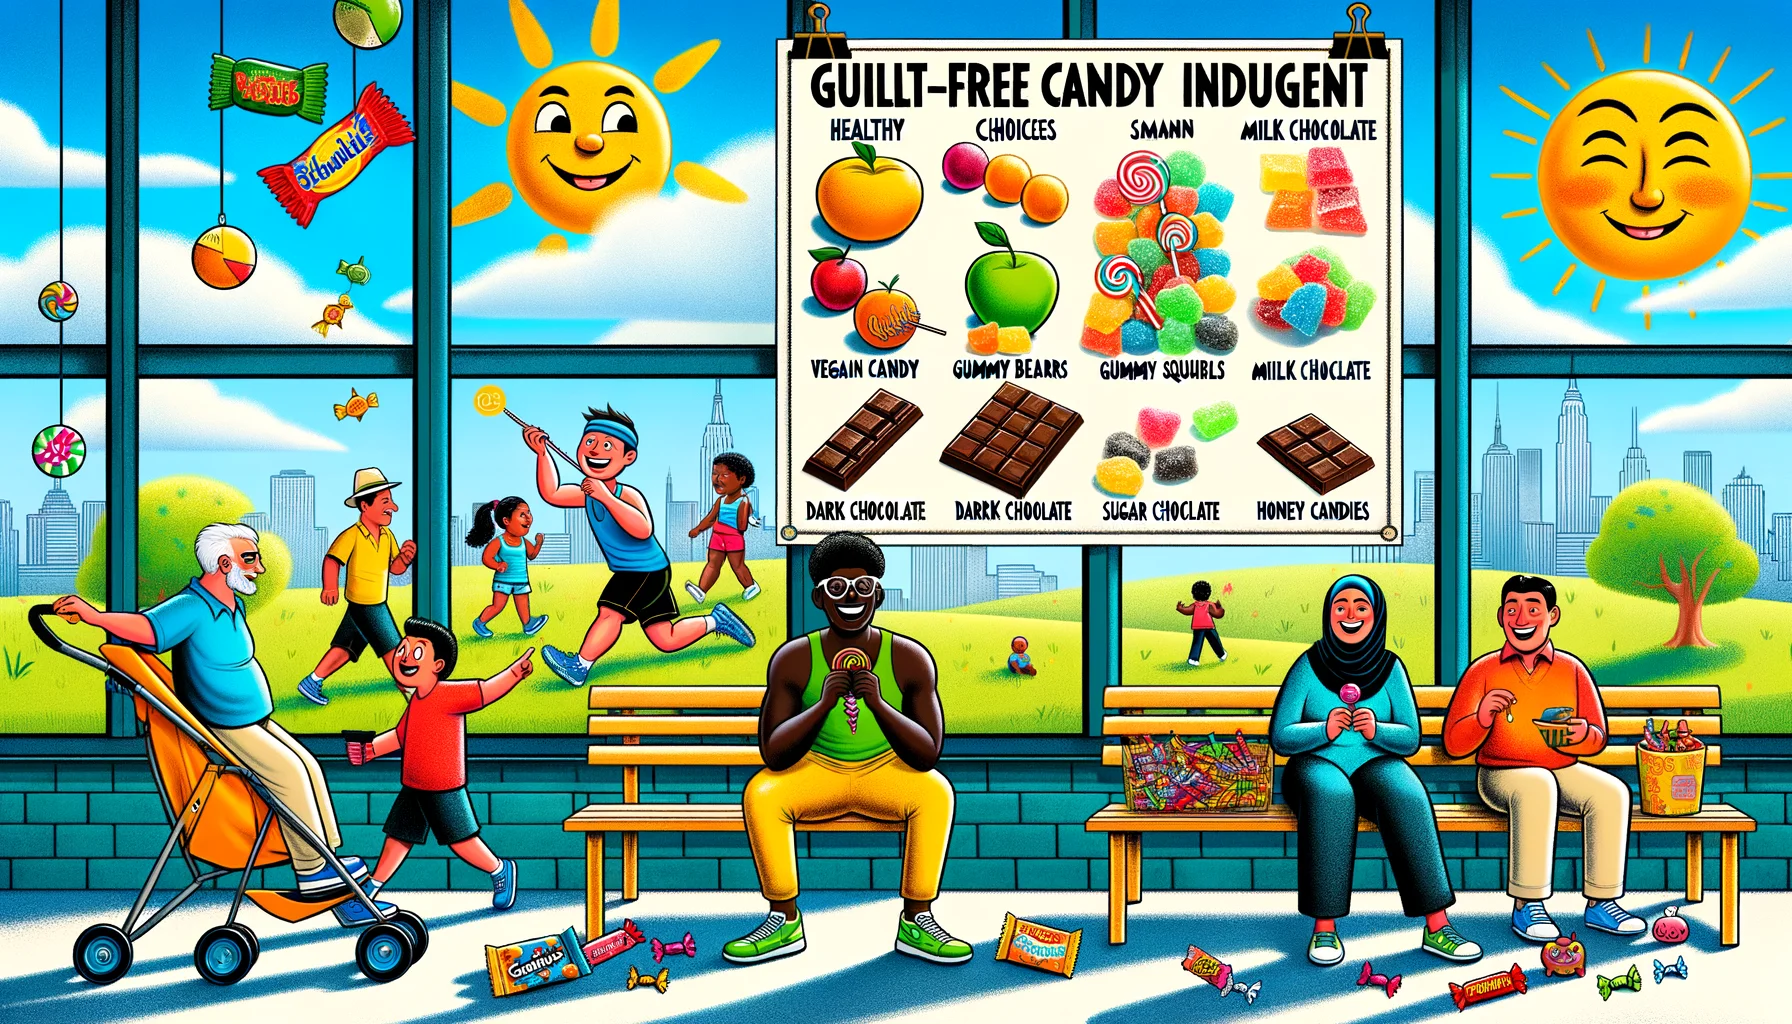 A lively and humorous image capturing the essence of 'Guilt-Free Candy Indulgence Tips'. Picture an airy, sun-filled room with a comic-style chart on the wall depicting 'healthy candy choices' versus 'calorie-loaded options', using caricatures of fruits and vegetables dressing up as candies. Outside the window, there's a Caucasian male, happily snacking on vegan gummy bears while jogging, and a Black female seated on a park bench enjoying dark chocolate squares instead of milk chocolate. Nearby, a Middle-Eastern child is picking honey candies over regular sugar-filled ones. The atmosphere should radiate merriment and light-heartedness, while conveying the message about smart candy choices.